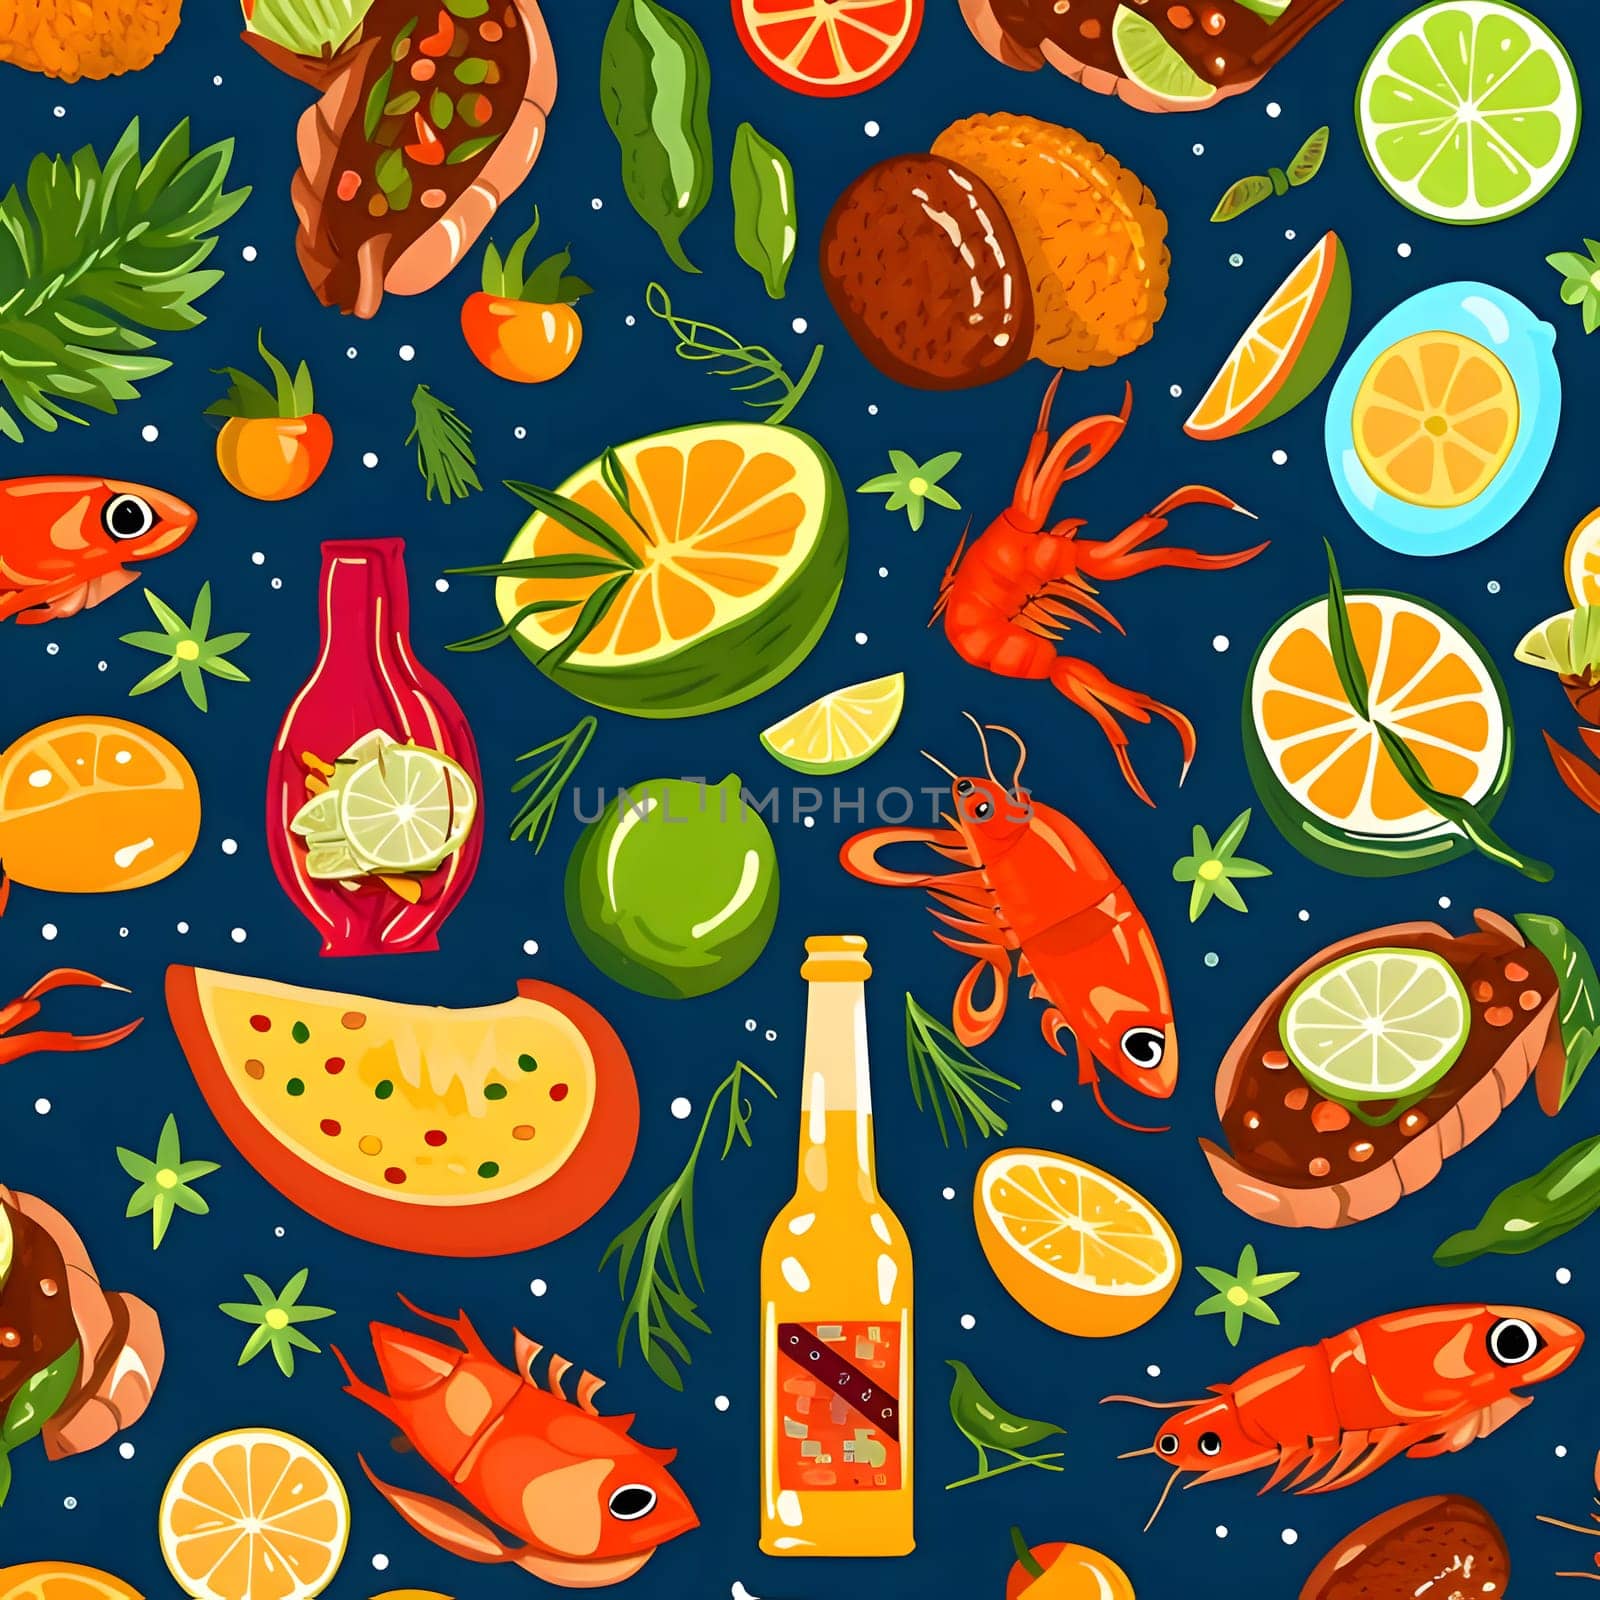 Patterns and banners backgrounds: Seamless pattern with seafood, fish, fruits and vegetables. Vector illustration